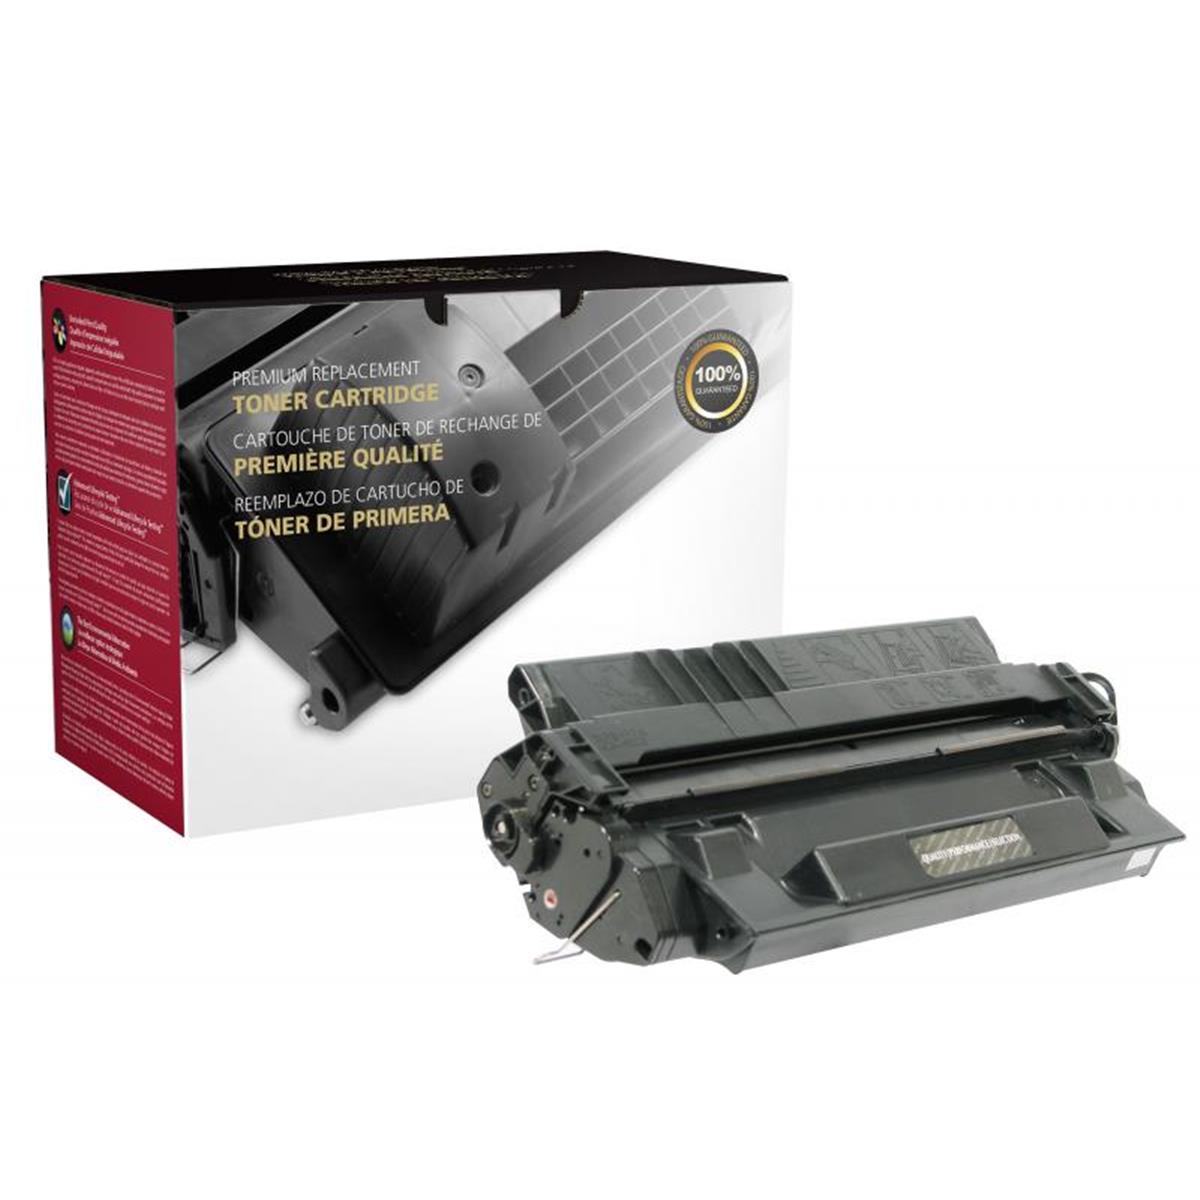 Picture of 200018 Universal Toner Cartridge for C4129X